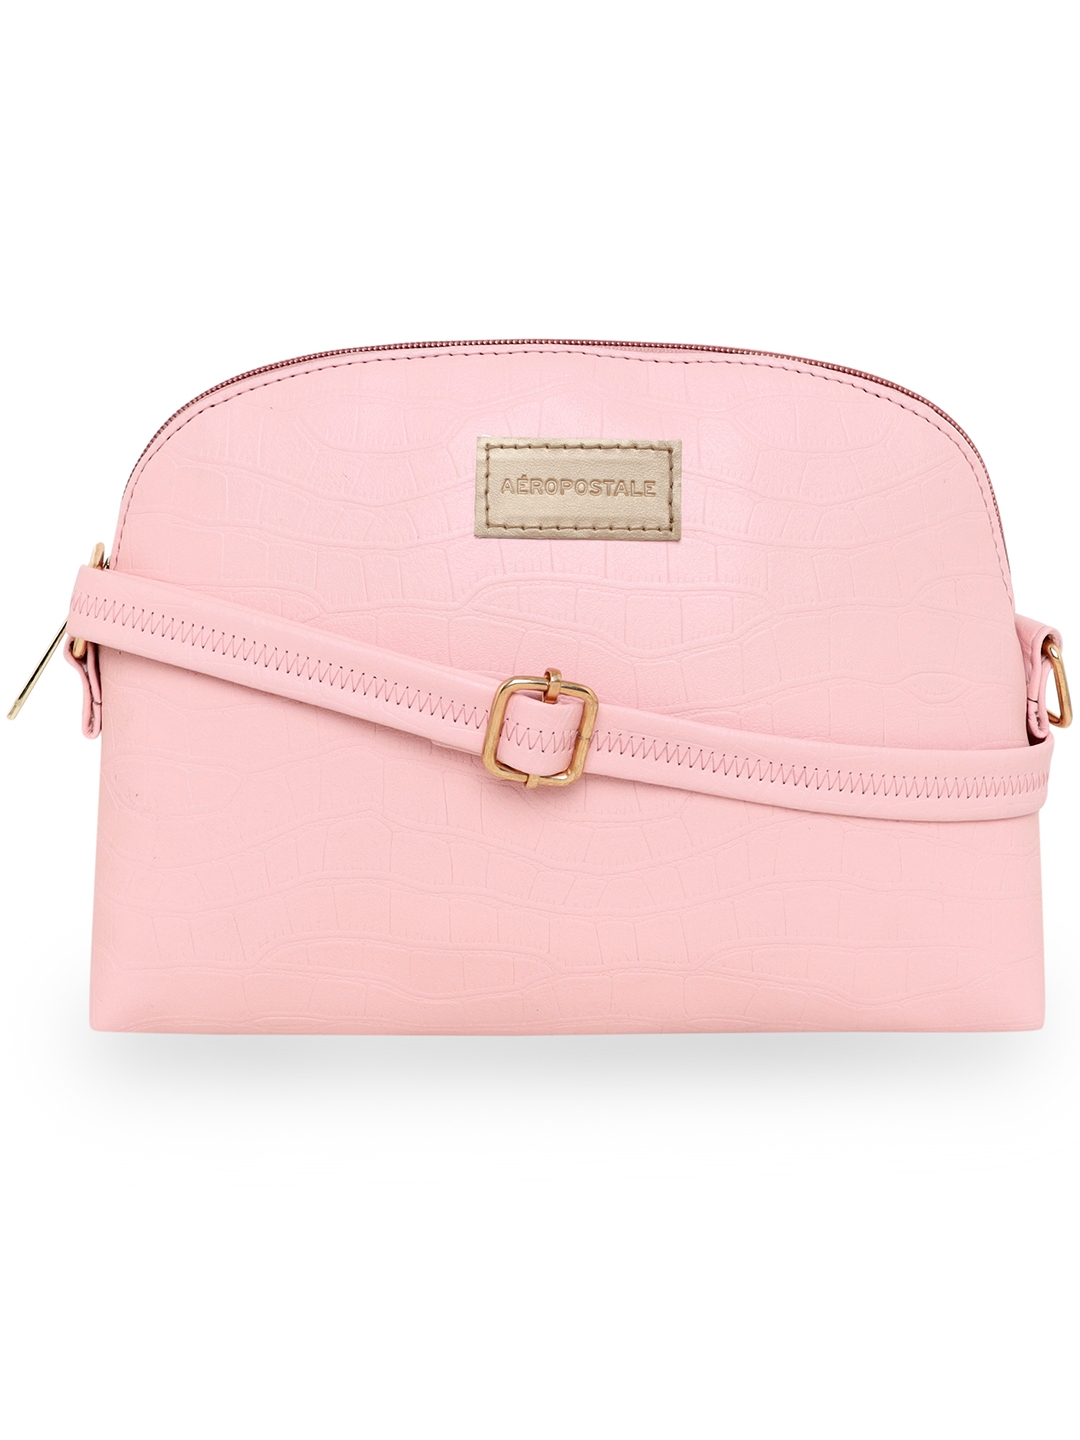 Aeropostale | Aeropostale Textured Kylie PU Sling Bag with non-detachable strap (Baby Pink)